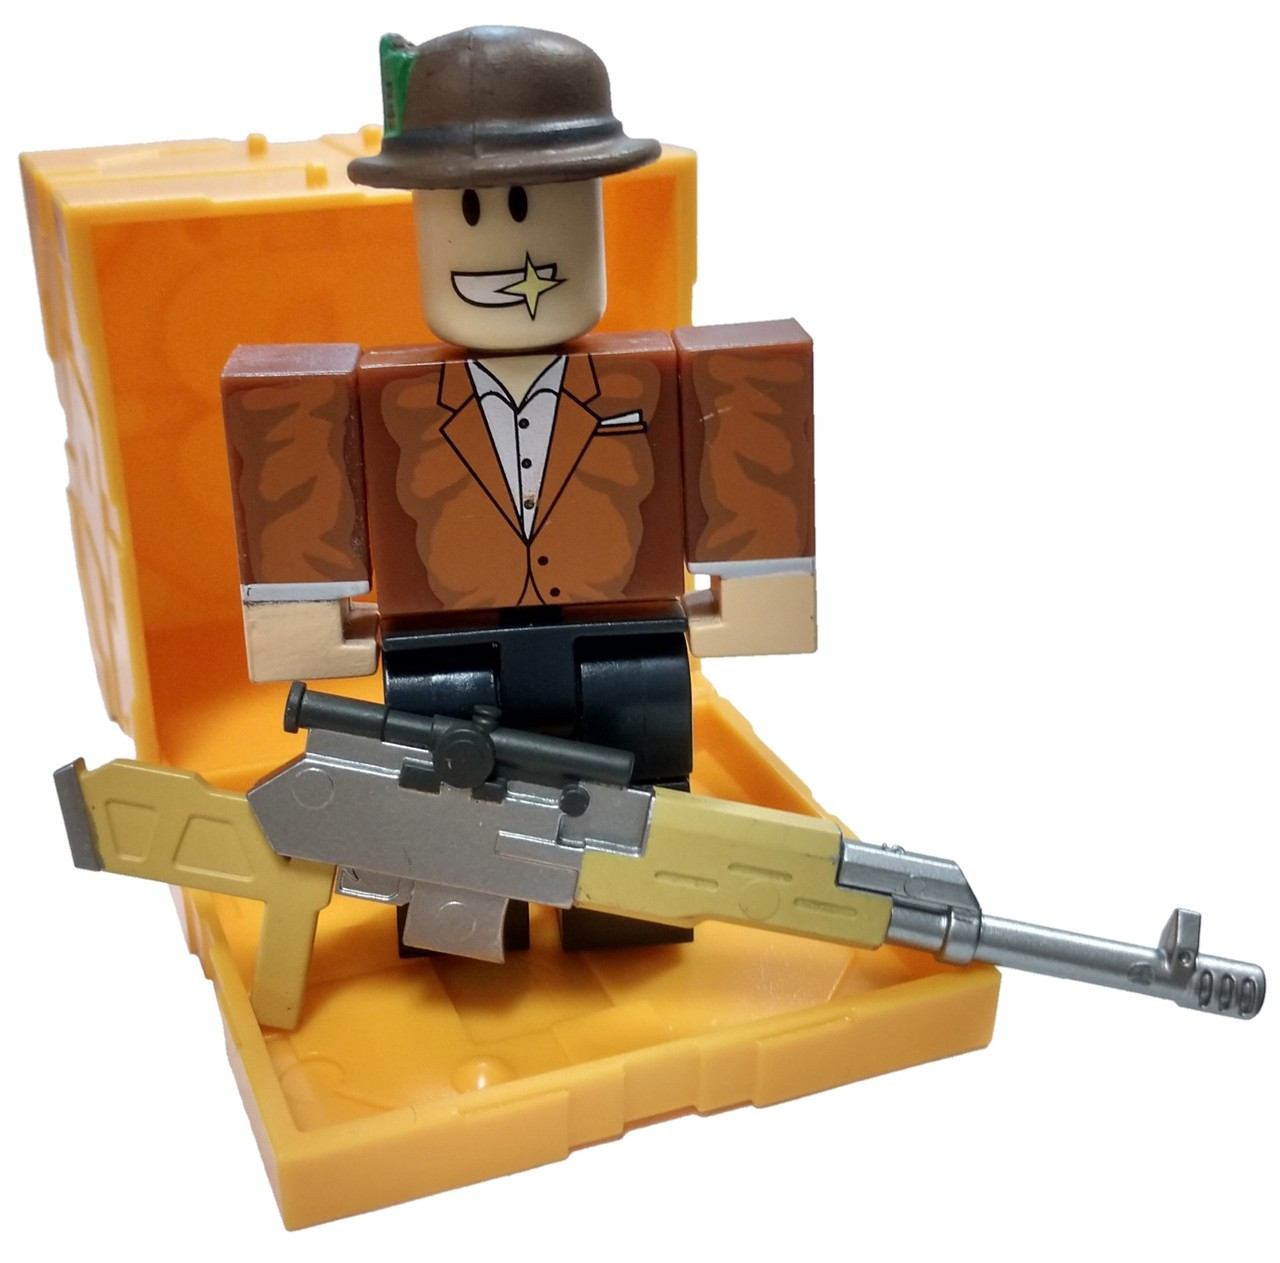 Roblox Series 5 Framed Agent Six 3 Mini Figure With Gold Cube And Online Code Loose Jazwares Toywiz - roblox series 6 4sci 3 mini figure with orange cube and online code loose jazwares toywiz